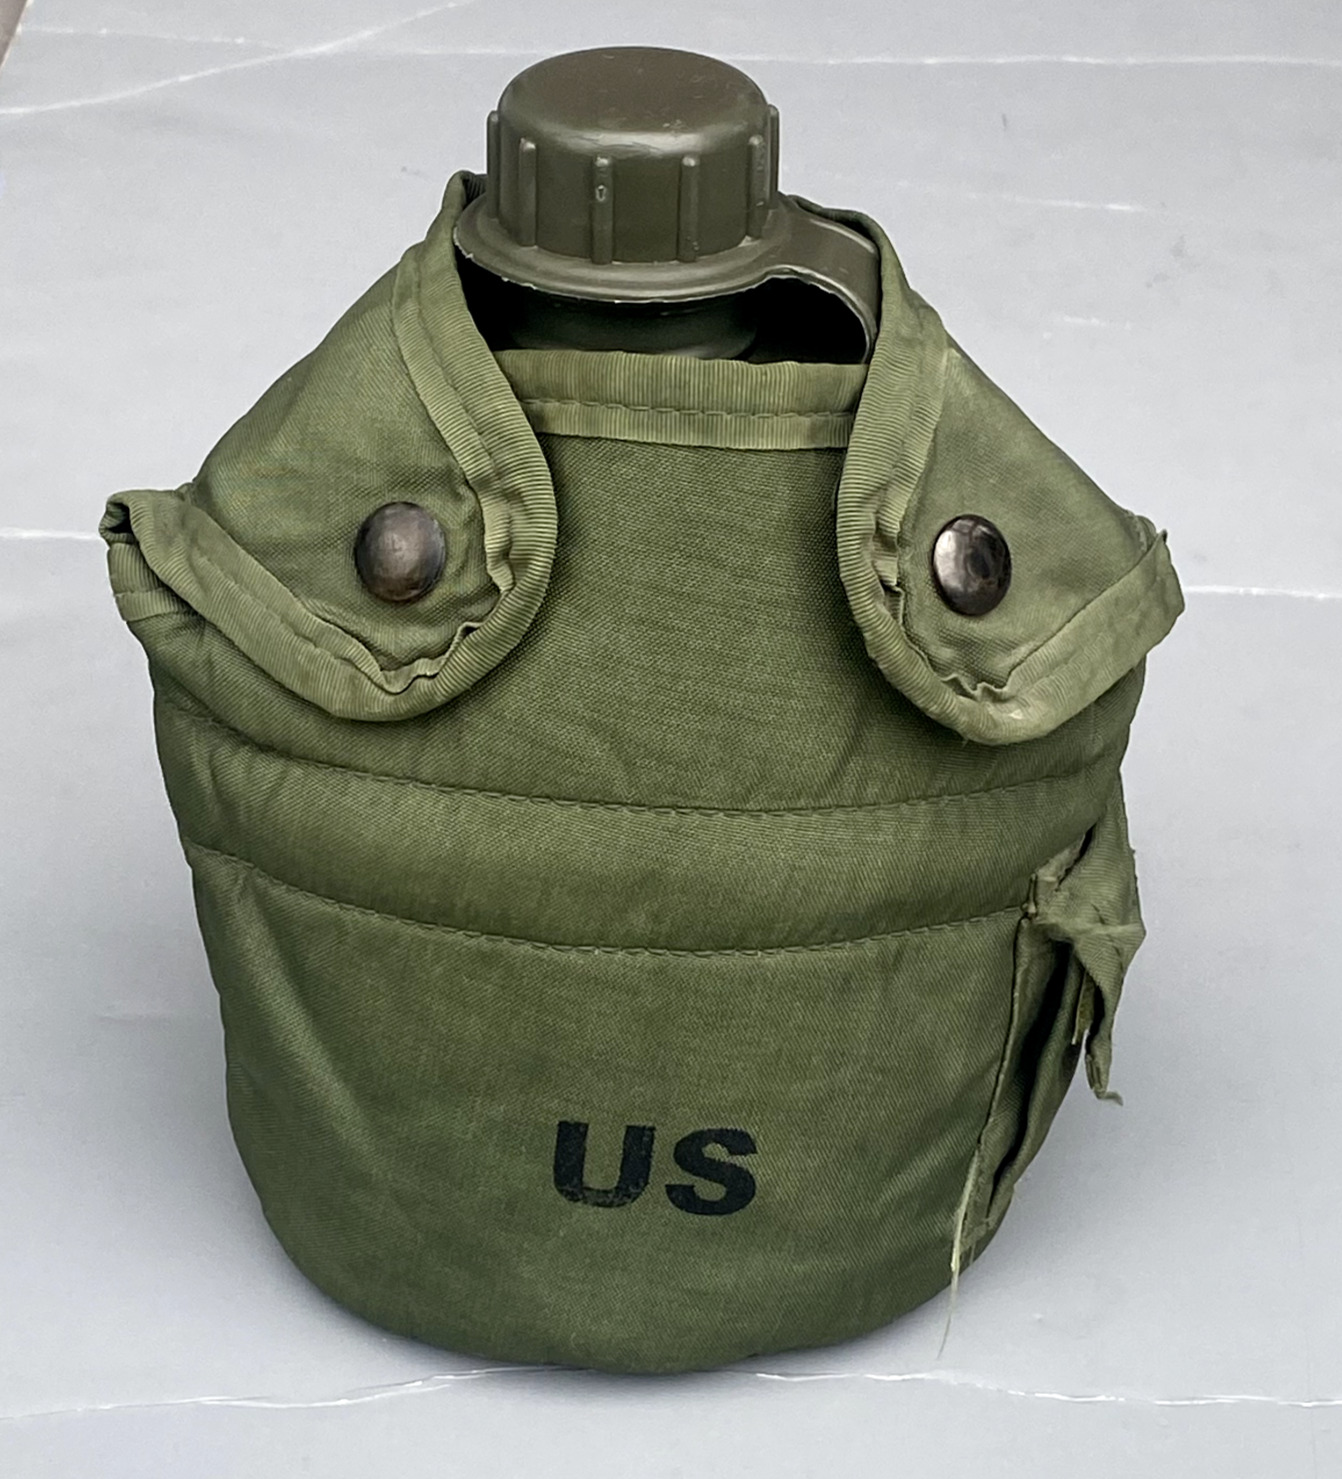 US ARMY 1 Quart Canteen Cover Pouch Insulated OD Green Military ALICE Modern